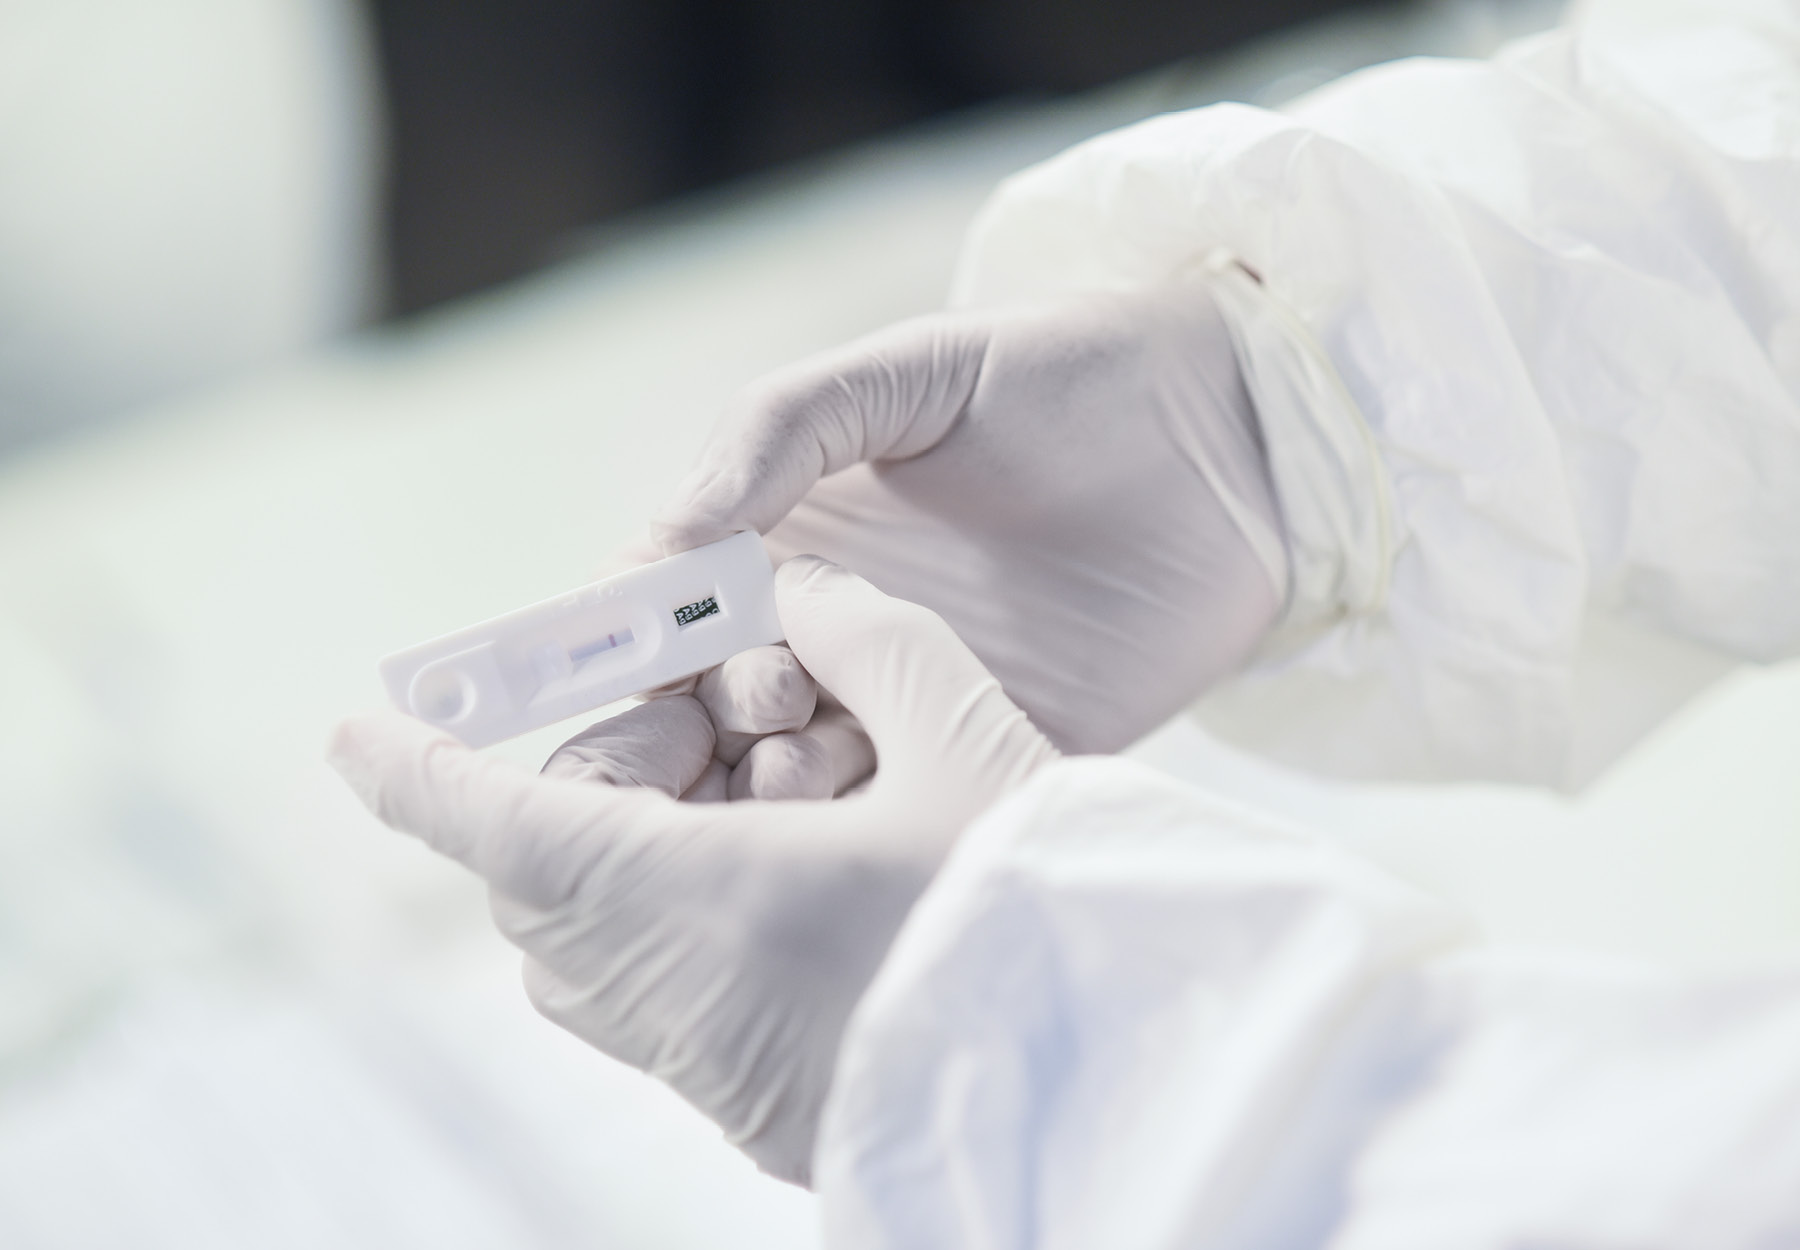 A closeup of a medical professional in full PPE holding an in vitro diagnostic test cartridge.